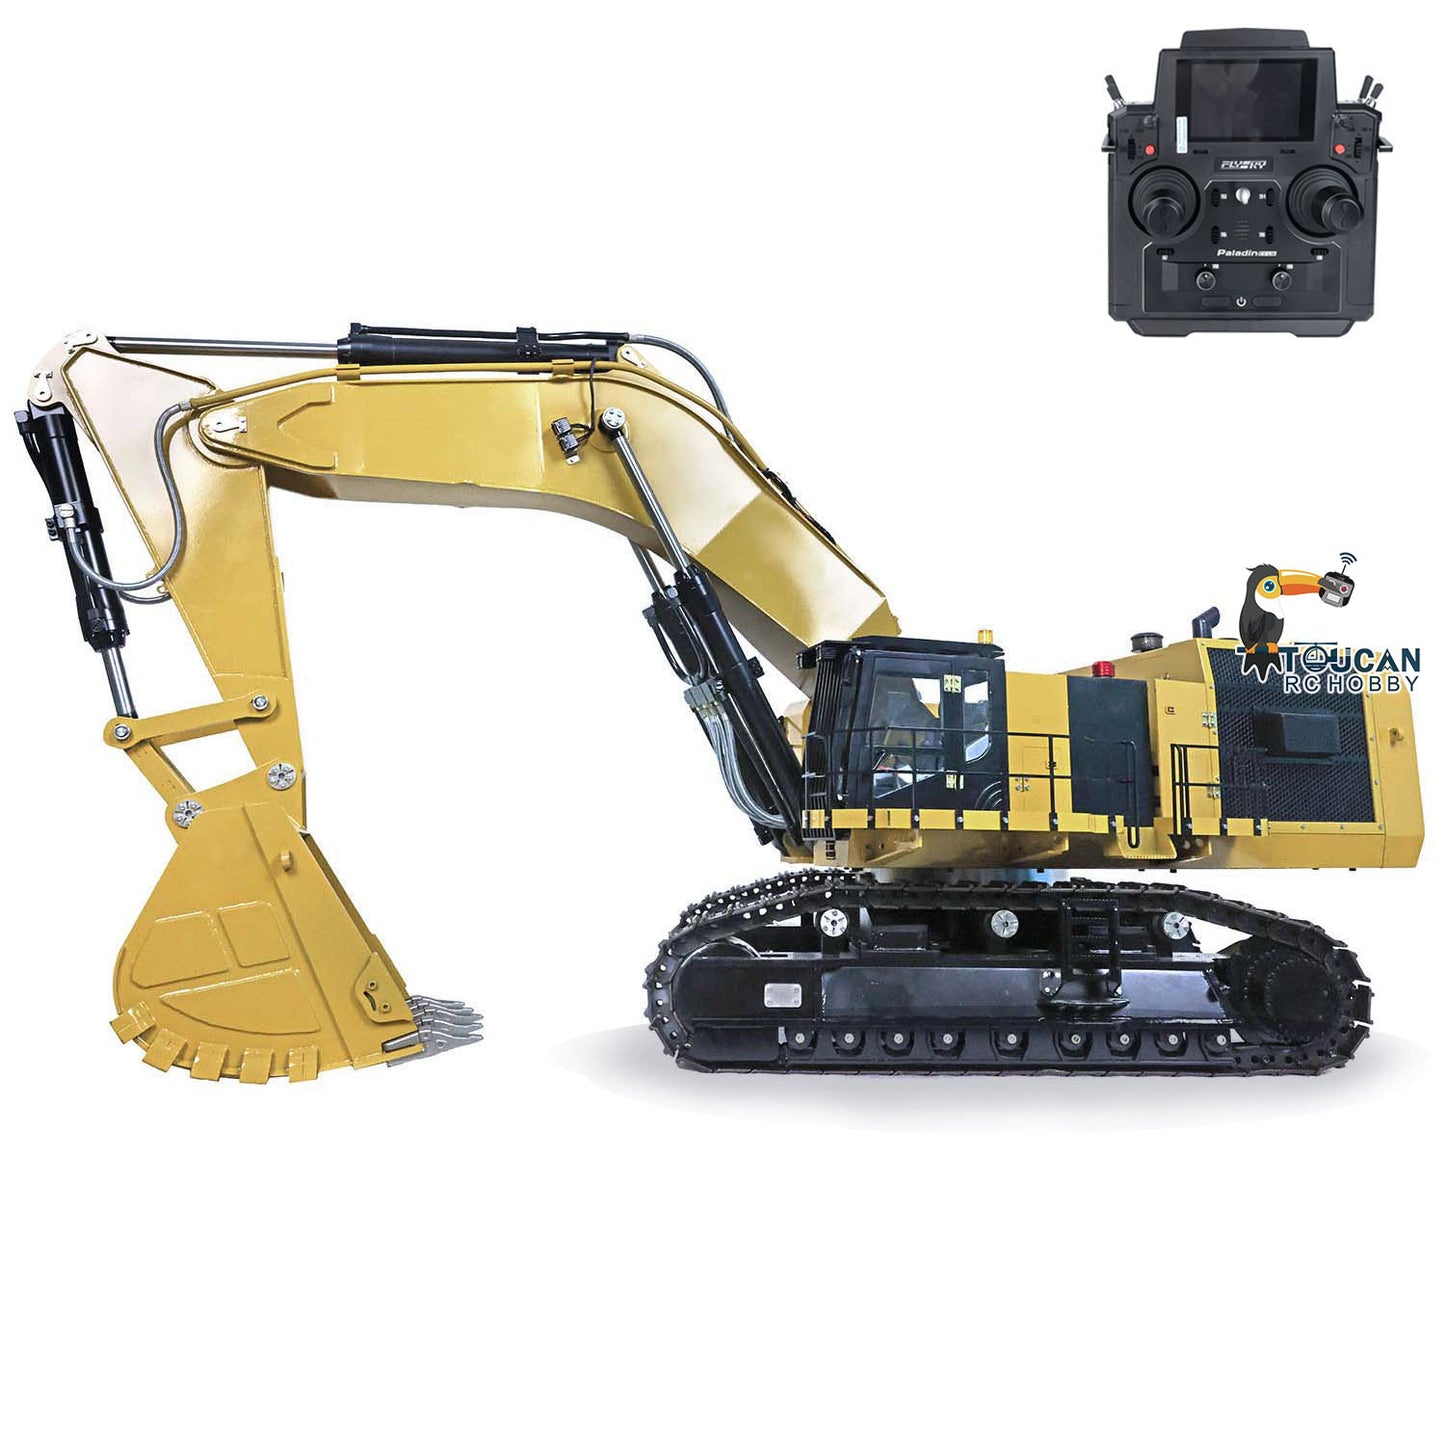 IN STOCK 6015B Metal 1/14 Assembled Hydraulic RC Excavator Remote Control Heavy Duty Diggers Model PL18Lite ESC Construction Cars